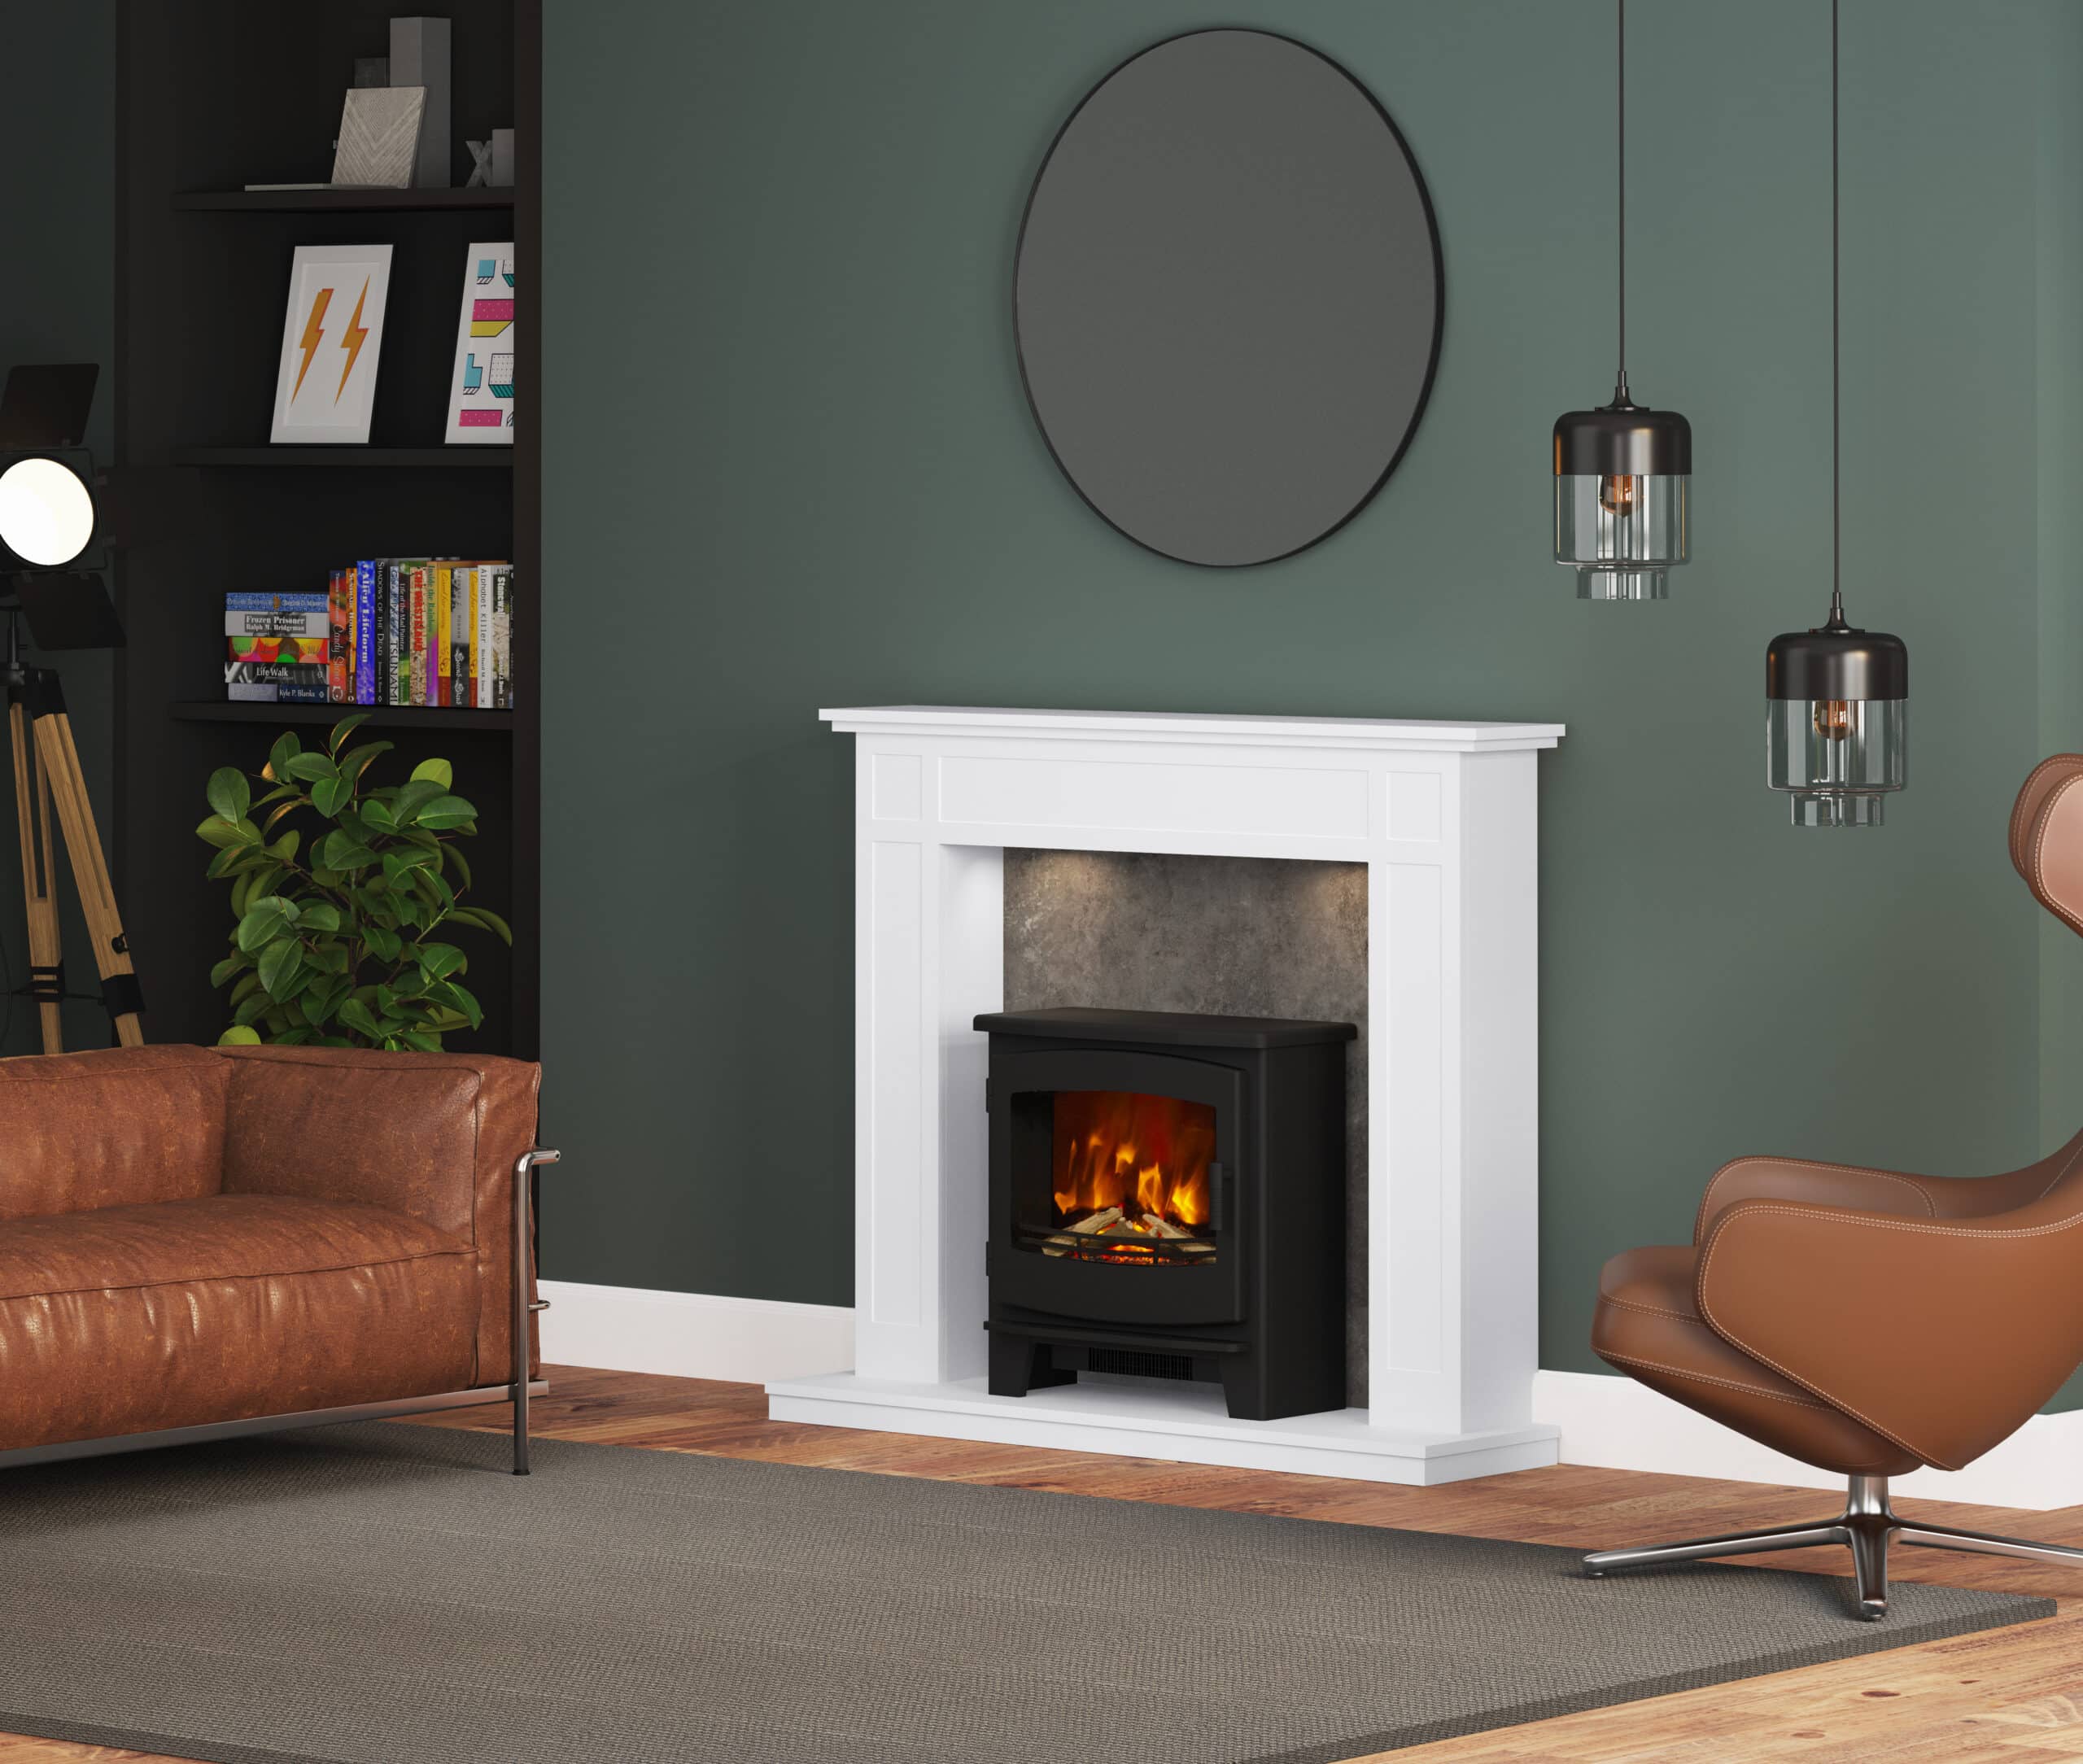 Braythorn in Ice White with Foxworth Large Electric Stove